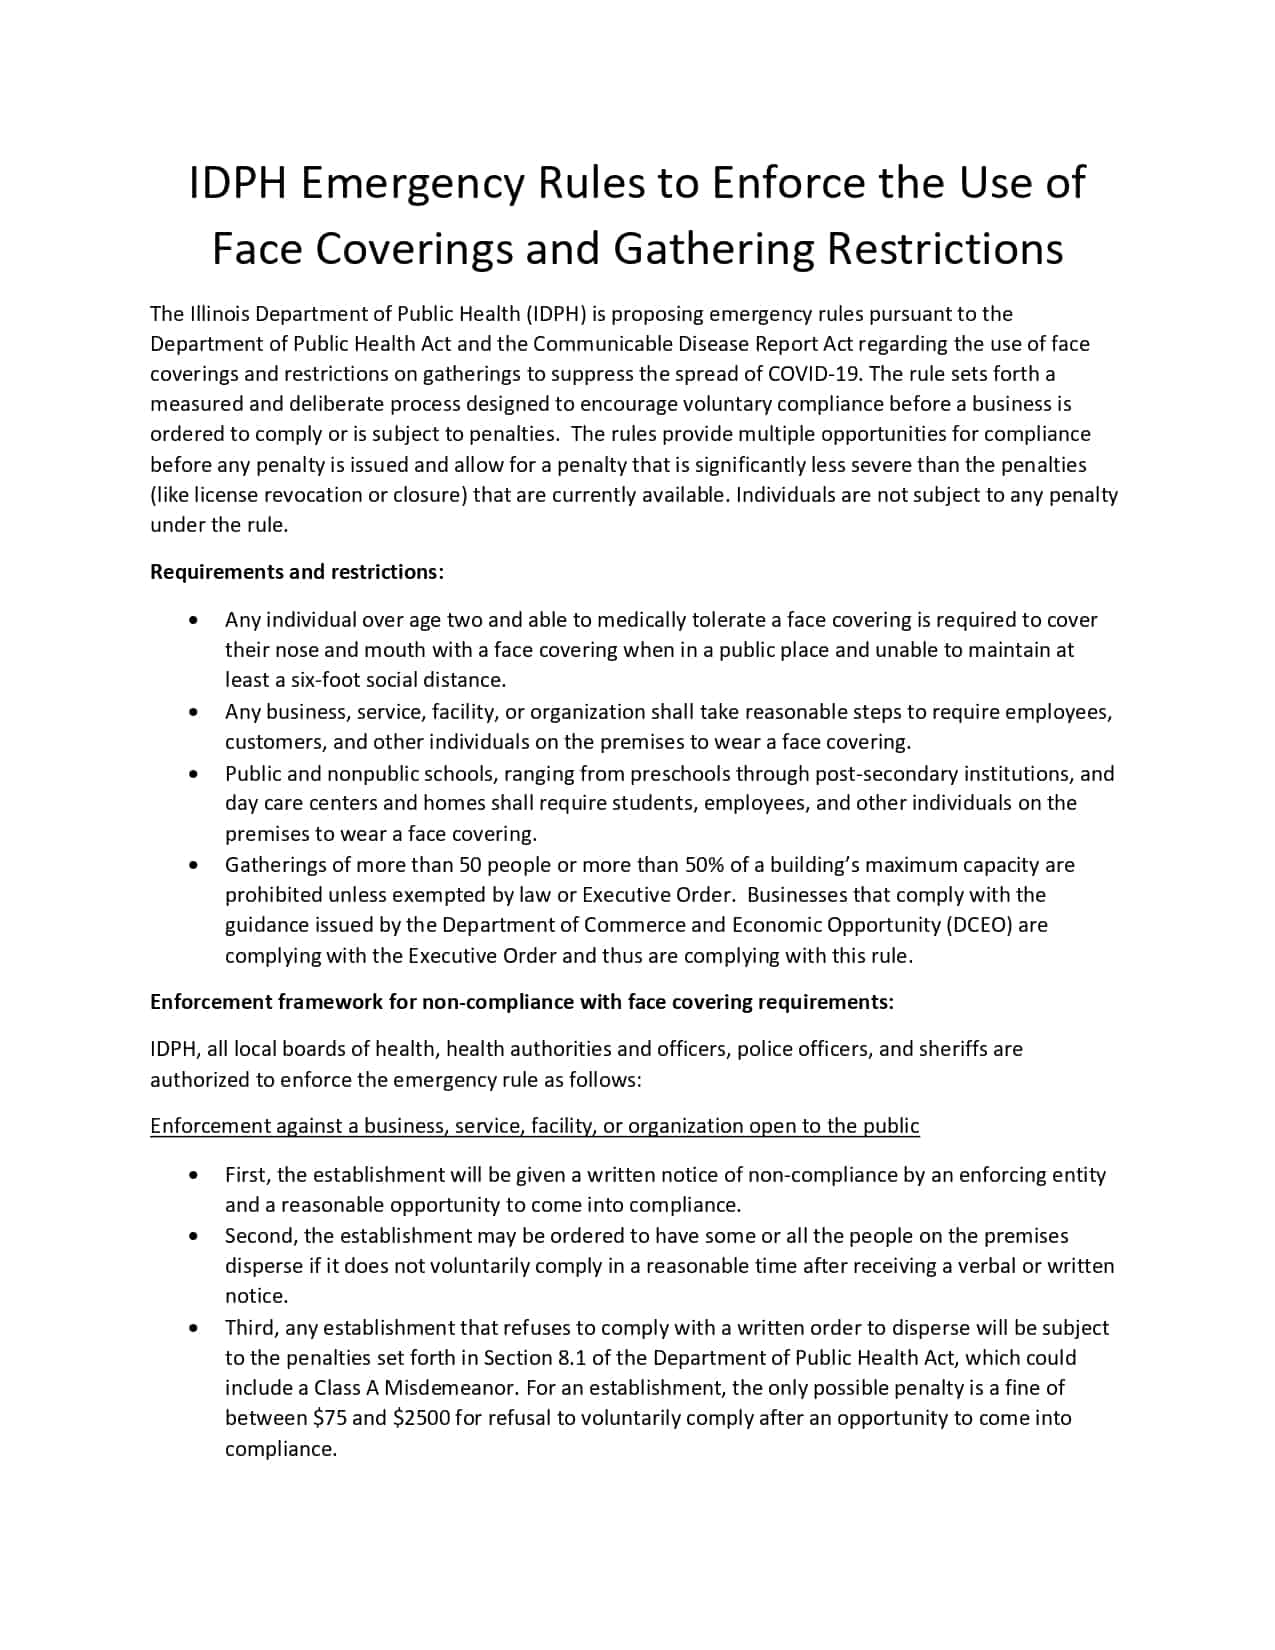 IDPH Emergency Rules to Enforce the Use of Face Coverings and Gathering Restrictions Fact Sheet_page-0001